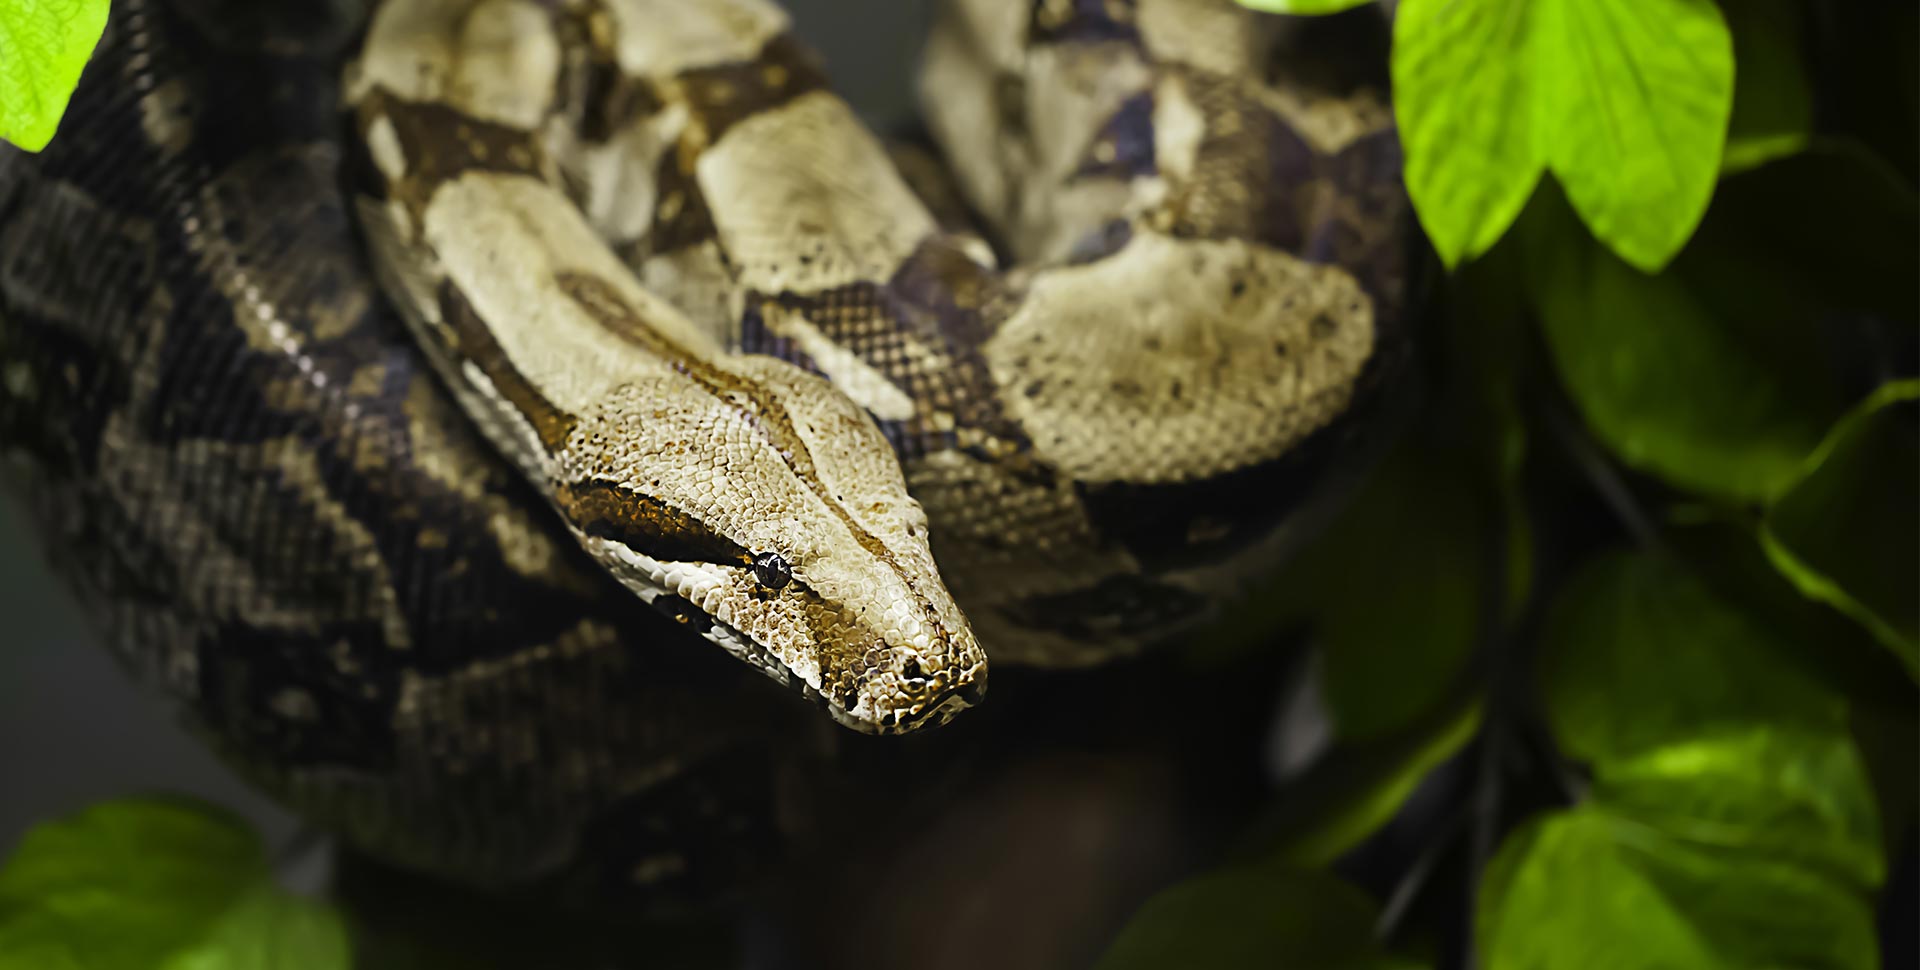 How to Care for a Pet Red Tail Boa